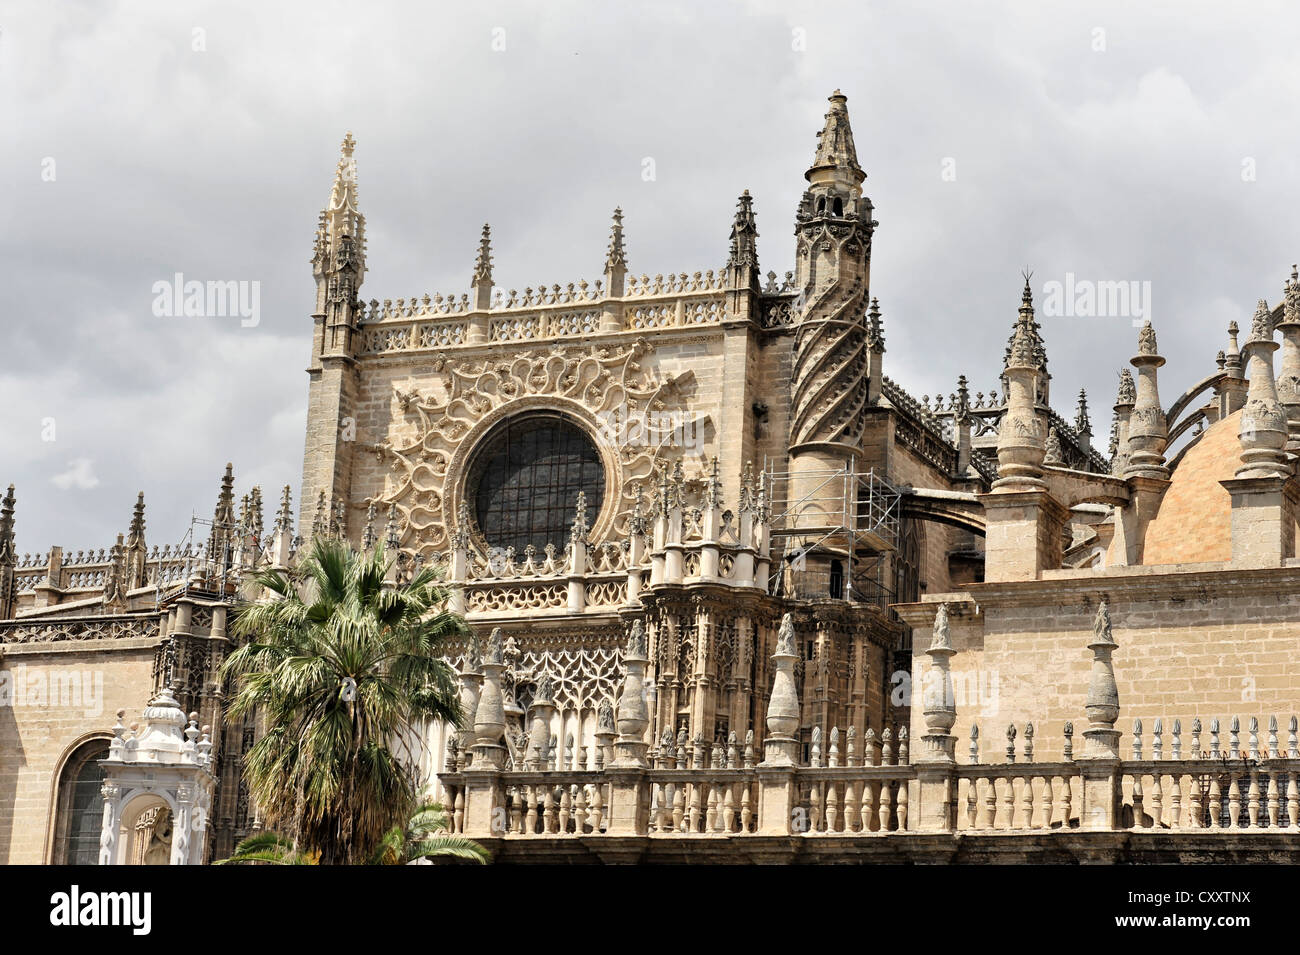 Seville Cathedral, Cathedral of Saint Mary of the Sea, La Giralda tower, Seville, Andalusia, Spain, Europe Stock Photo